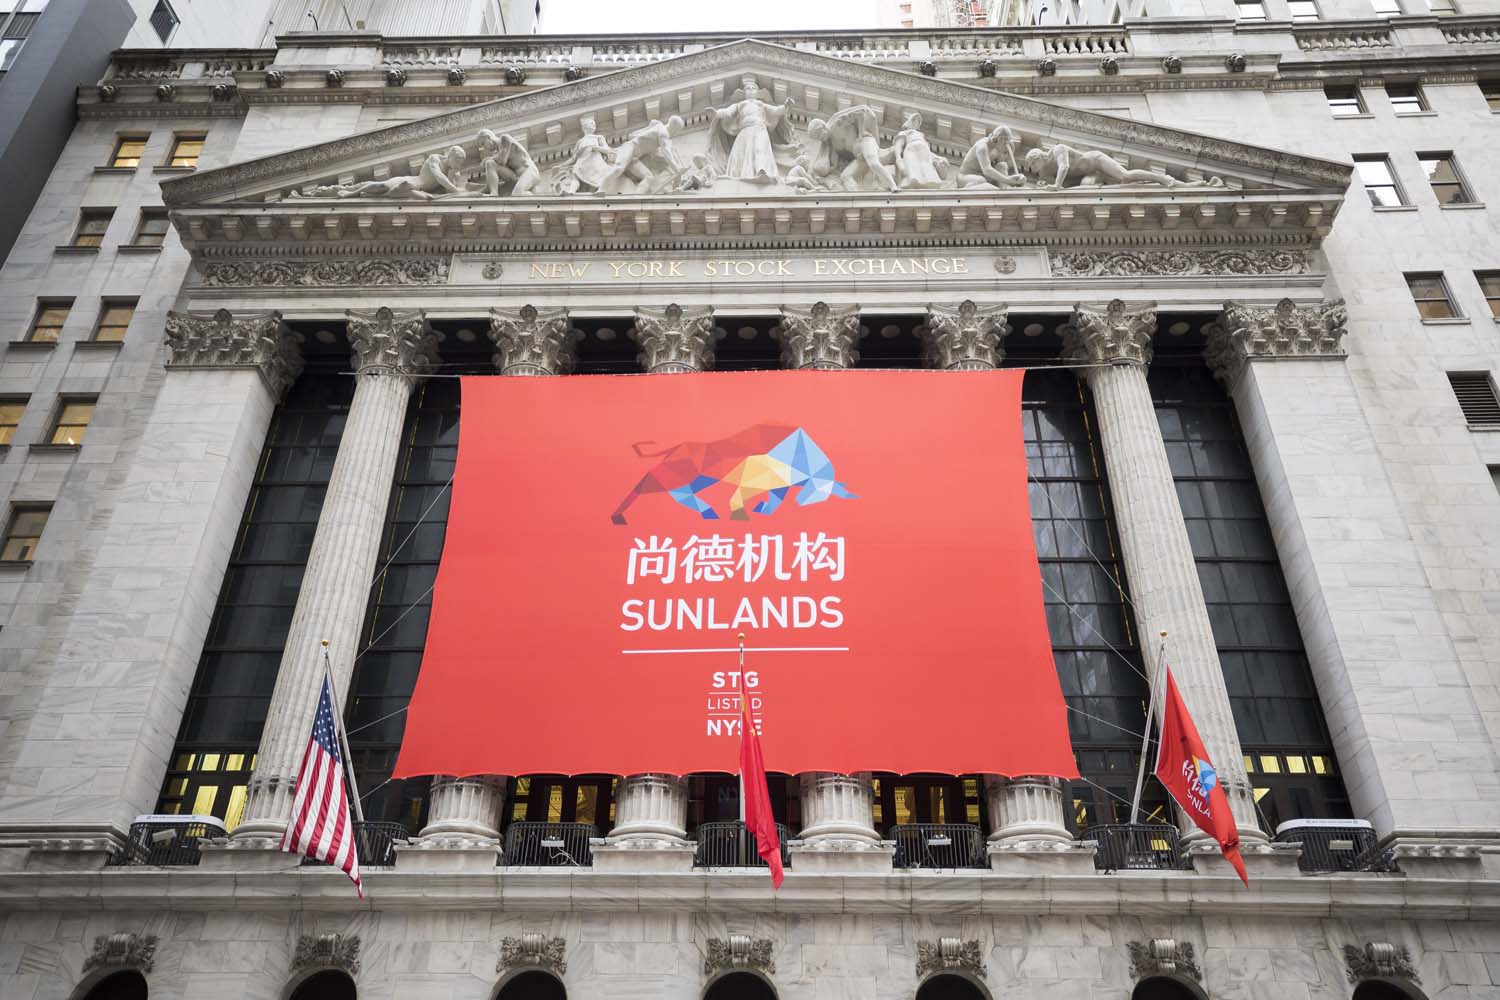 Sunlands IPO at the NYSE